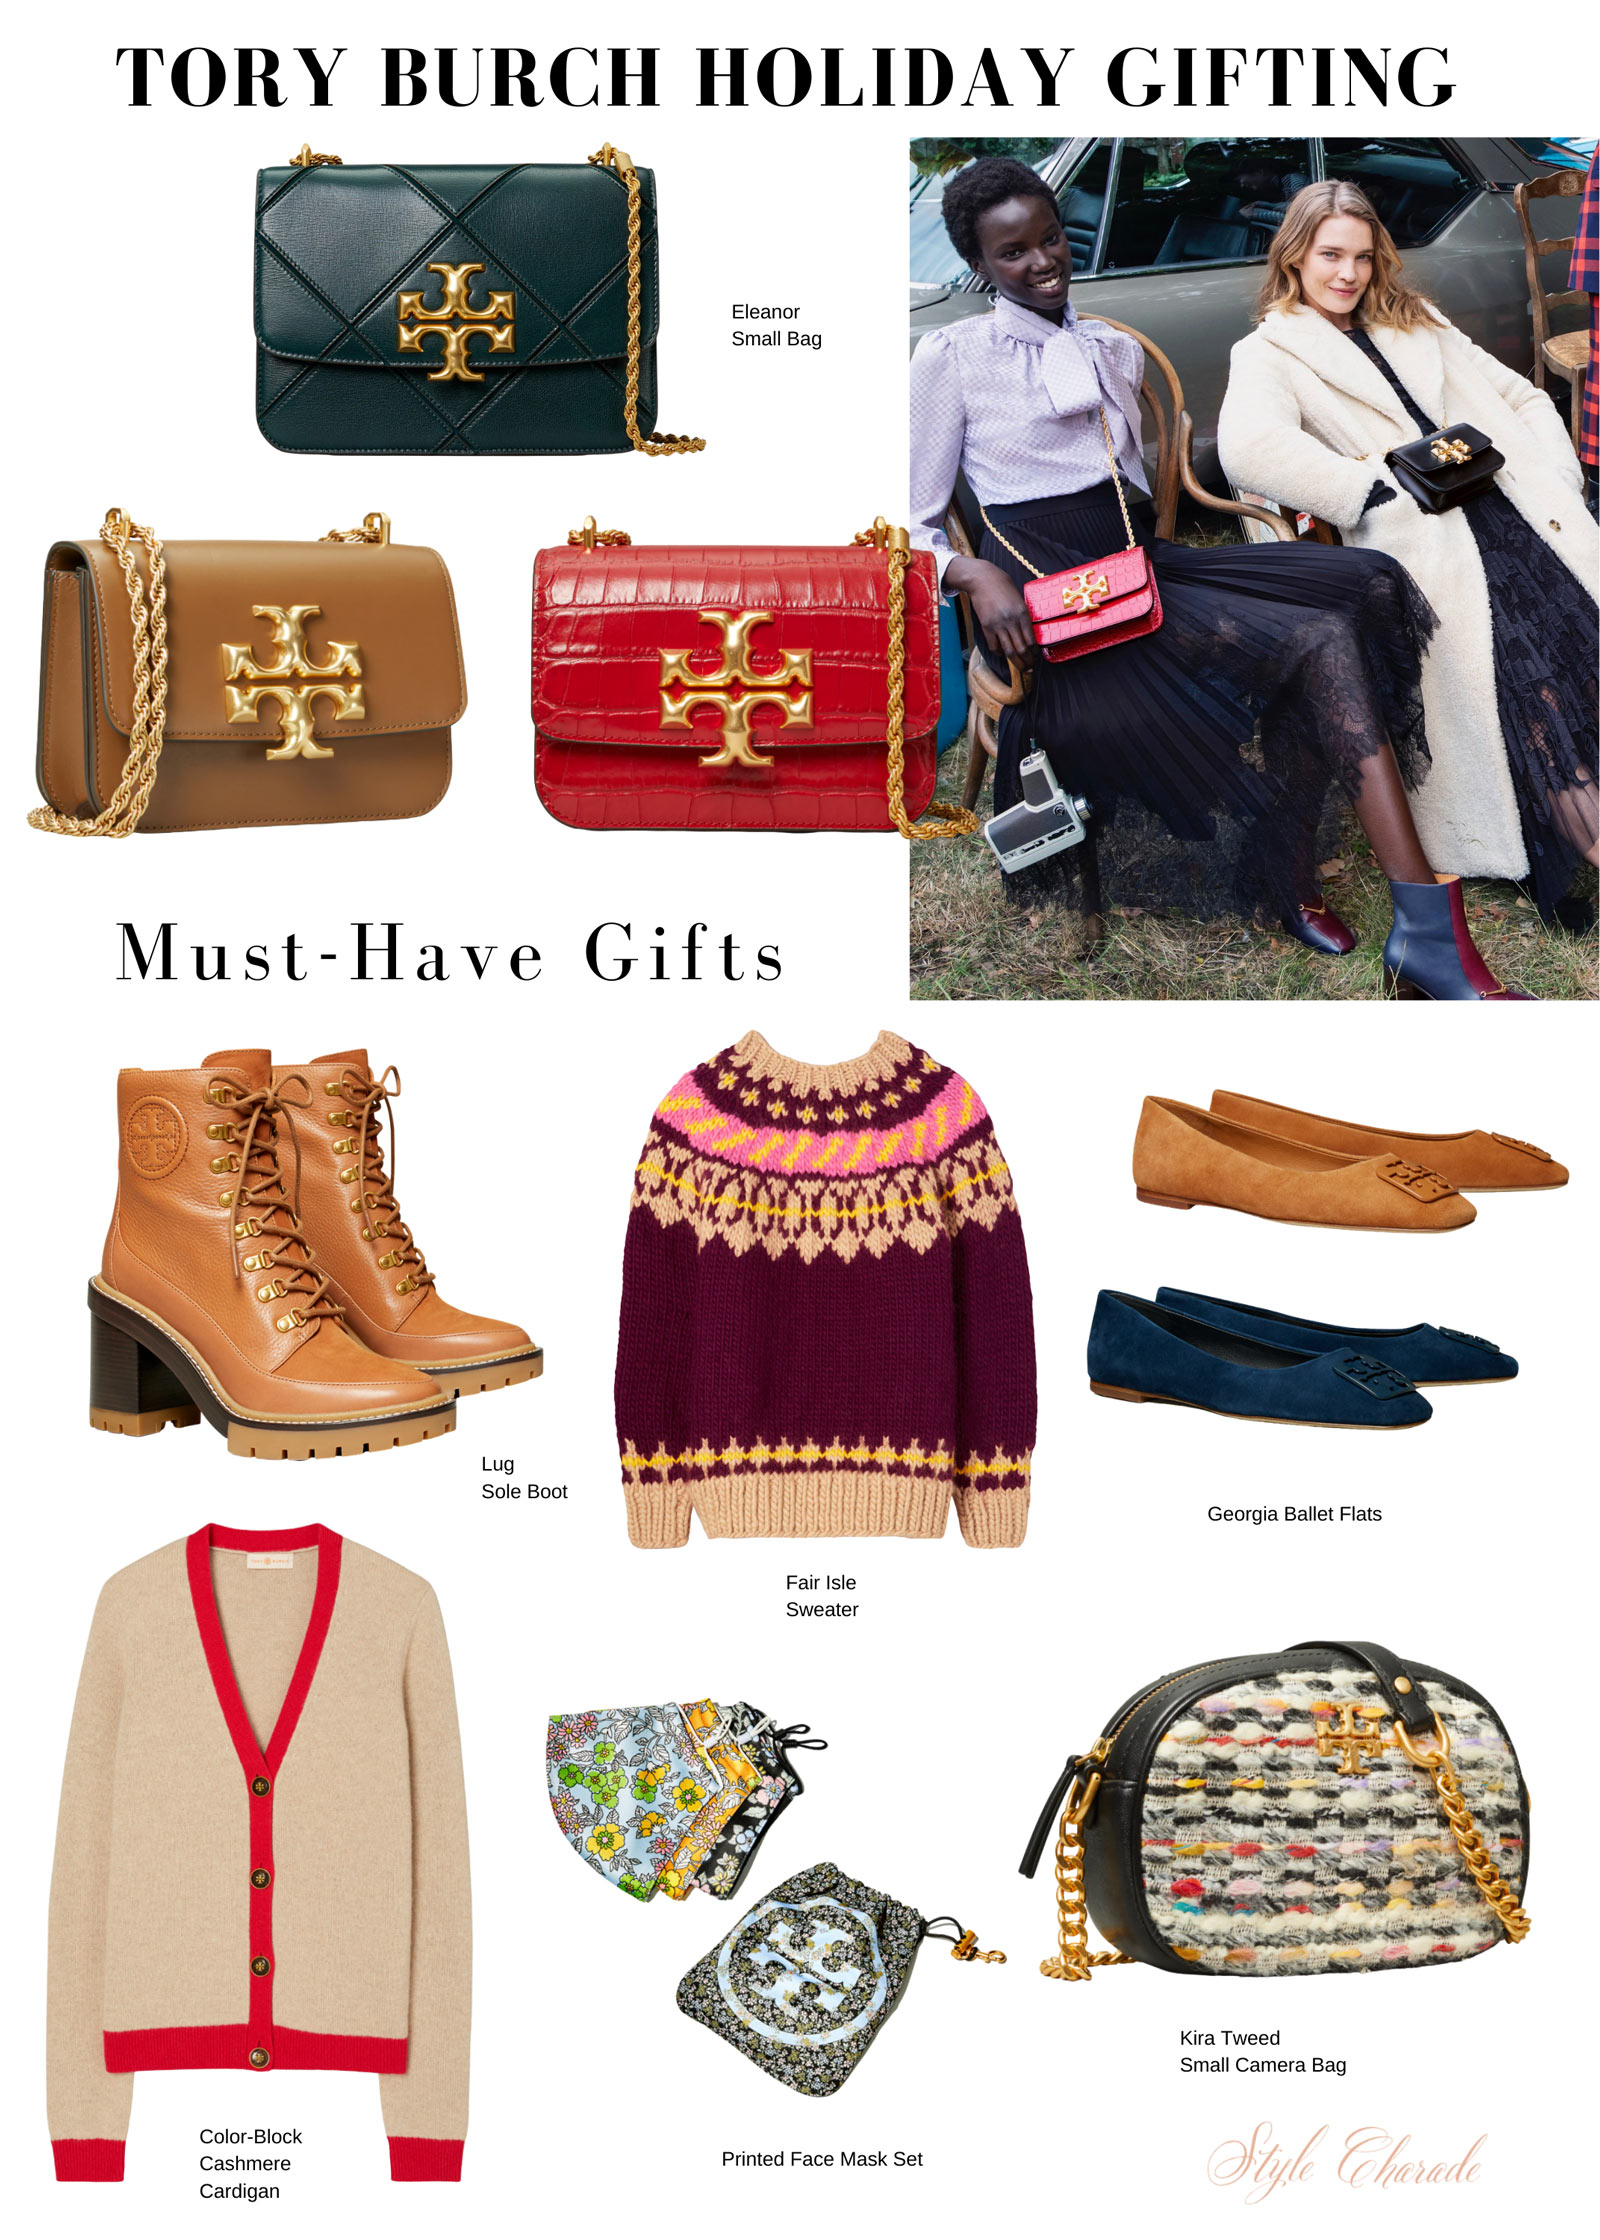 The Best Tory Burch Holiday Gift Ideas - Style Charade